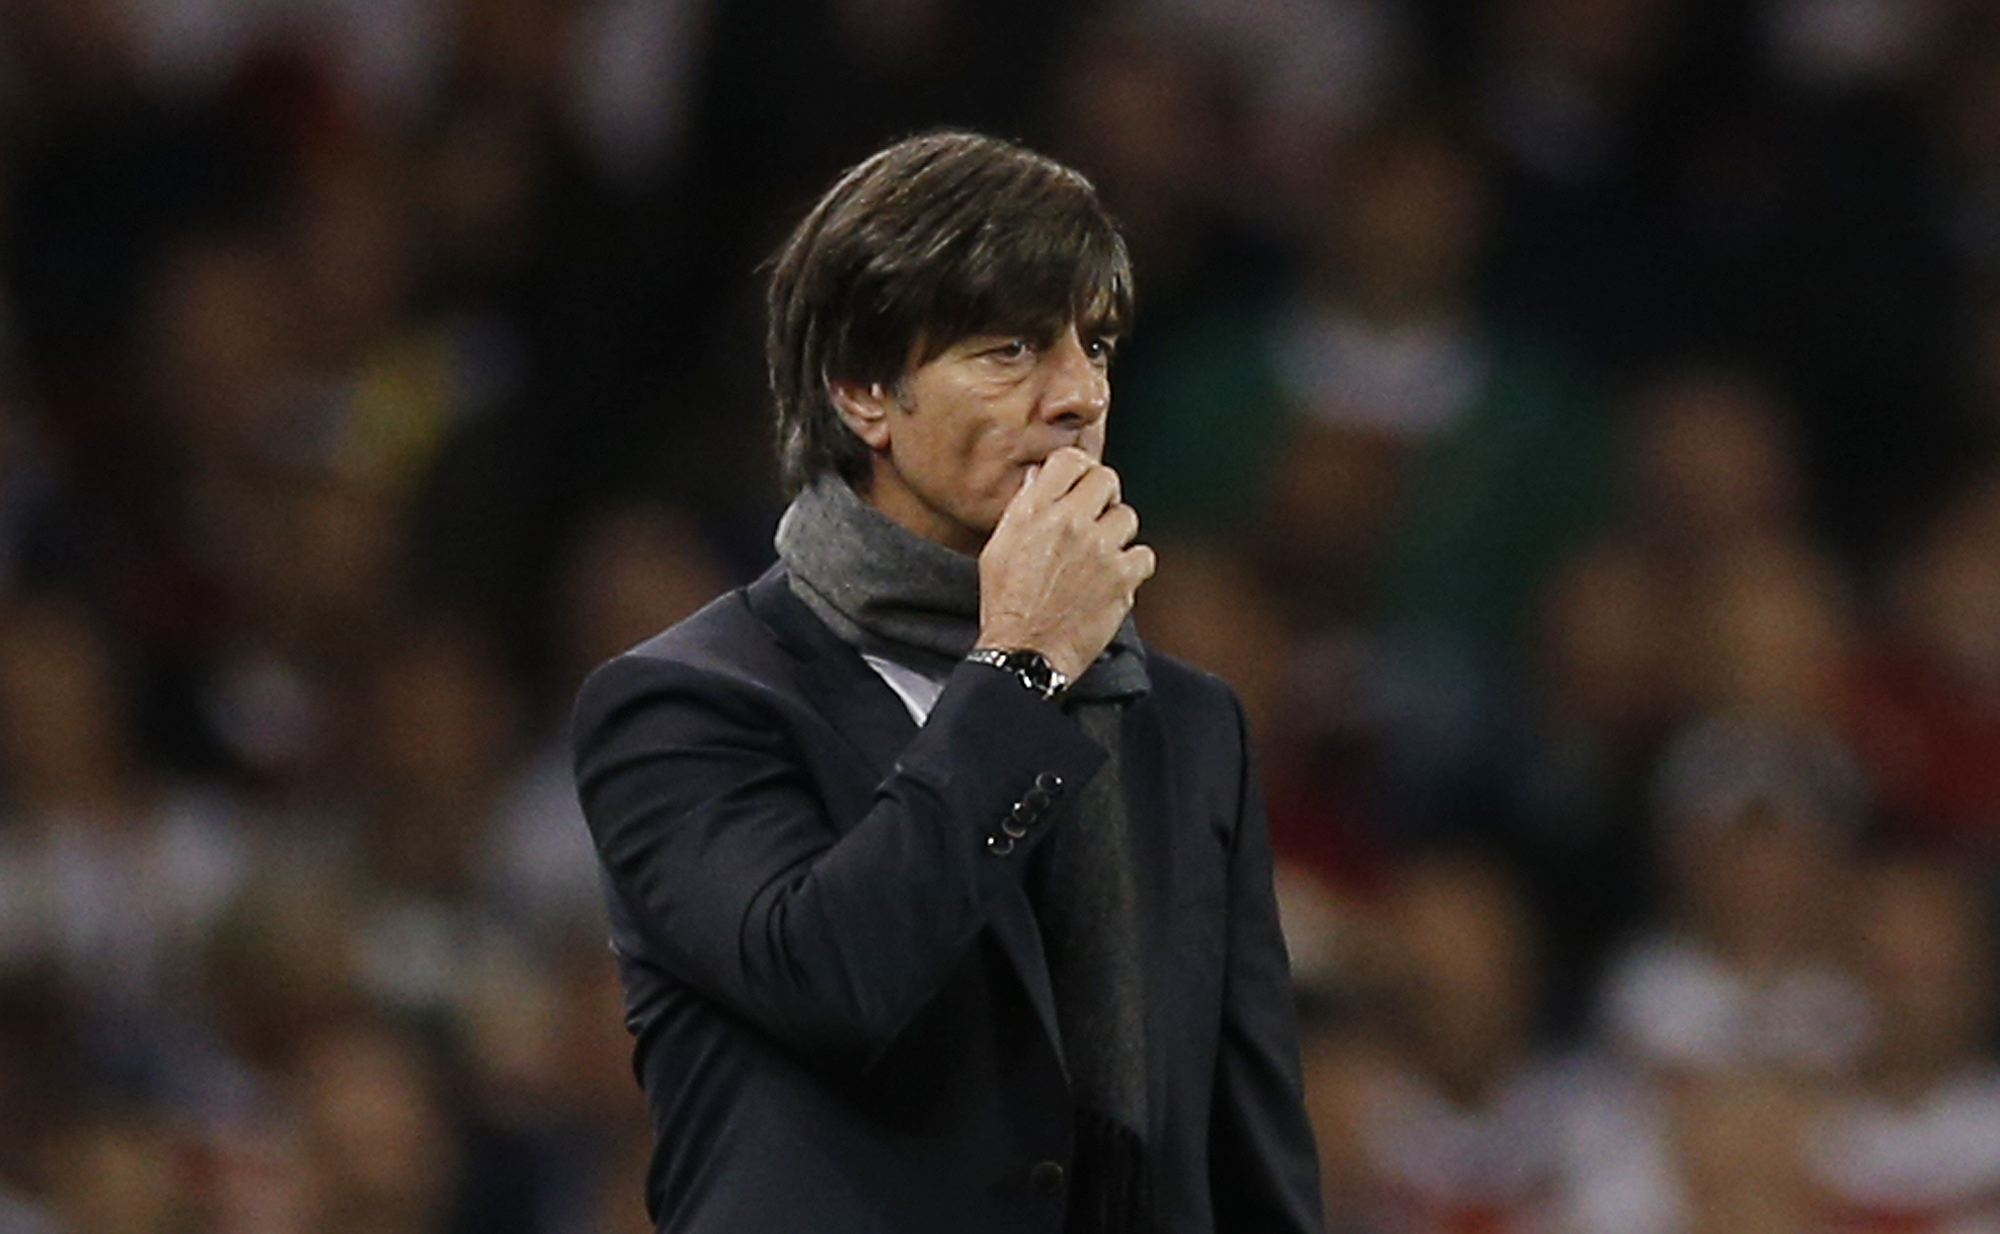 Football - Republic of Ireland v Germany - UEFA Euro 2016 Qualifying Group D - Aviva Stadium, Dublin, Republic of Ireland - 8/10/15nGermany coach Joachim Low nAction Images via Reuters / Andrew CouldridgenLivepicnEDITORIAL USE ONLY.